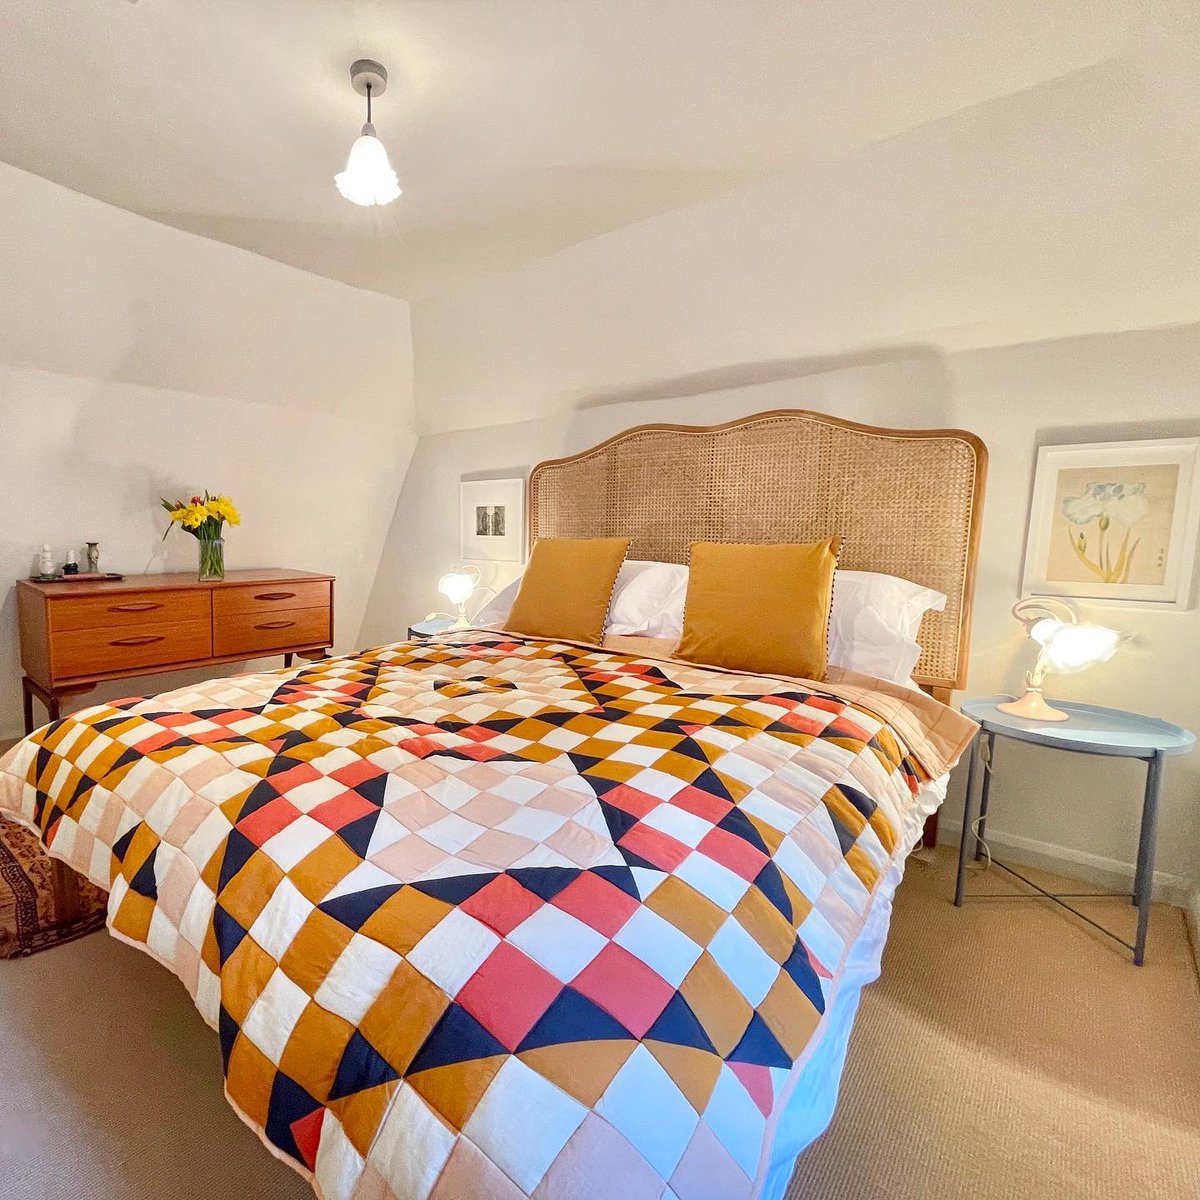 New property ‘The Cove’ 🏡 a stylish and cosy retreat, sleeping 4 guests. Secure your 2021 break today keeperscottages.co.uk/properties/the… #holidaycottages #holidaycottage #cottagebreak #staycation #ukstaycations #staycations